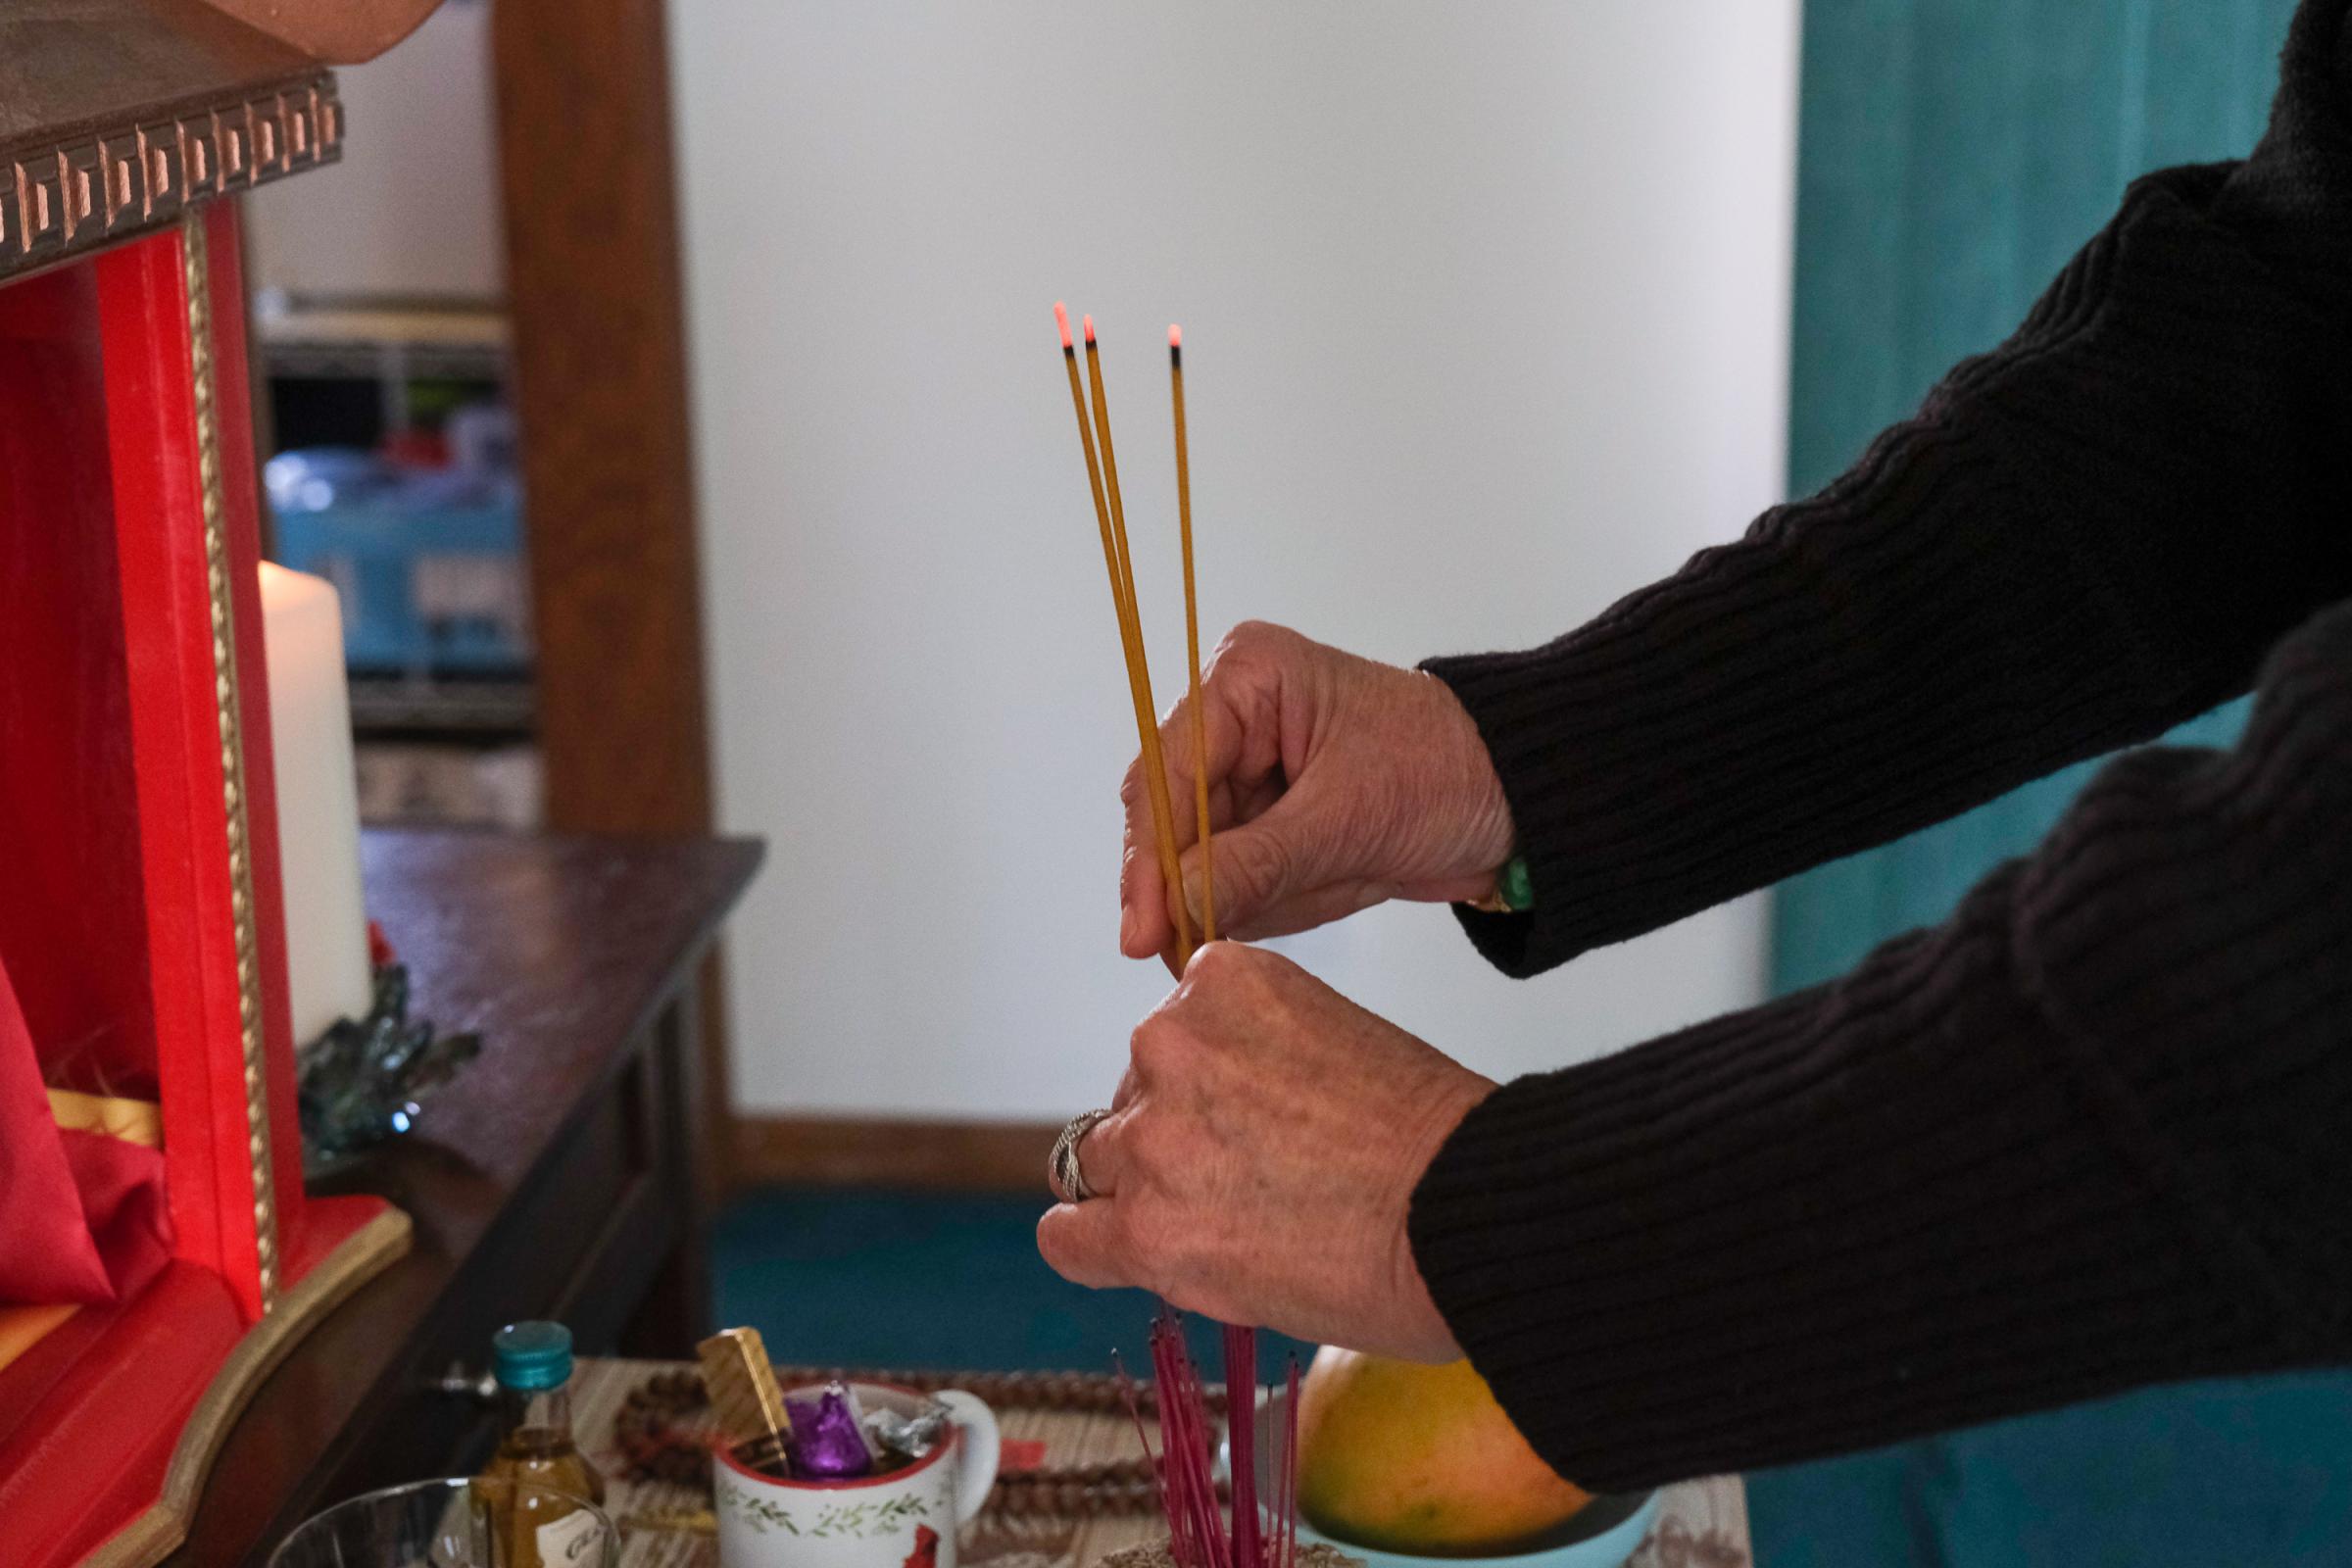 PAPILLION, NE - MARCH 19, 2022: Lu Wang lights incense every morning in honor of Ming Wang in her home in Papillion, Nebraska on March 19, 2022. (Photo by Arin Yoon for The Washington Post) Papillion United States